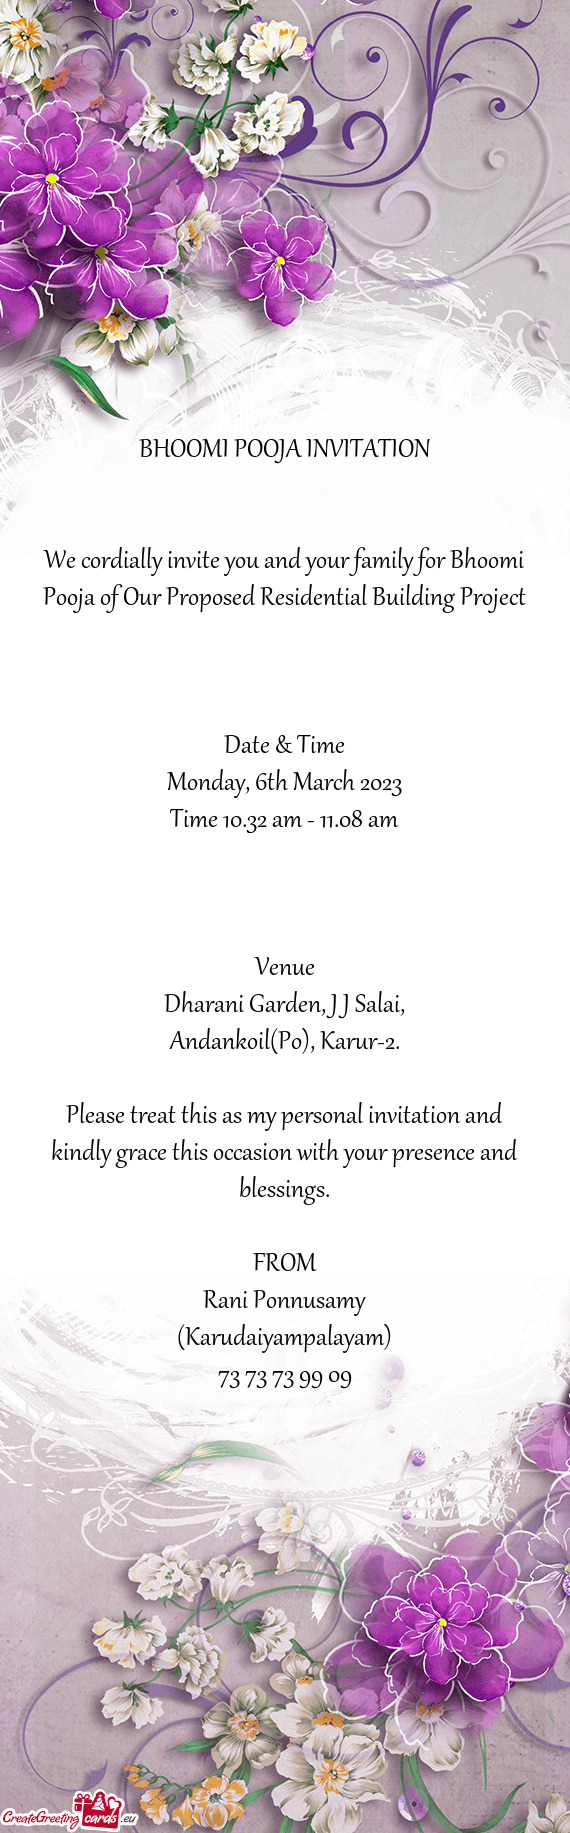 We cordially invite you and your family for Bhoomi Pooja of Our Proposed Residential Building Projec